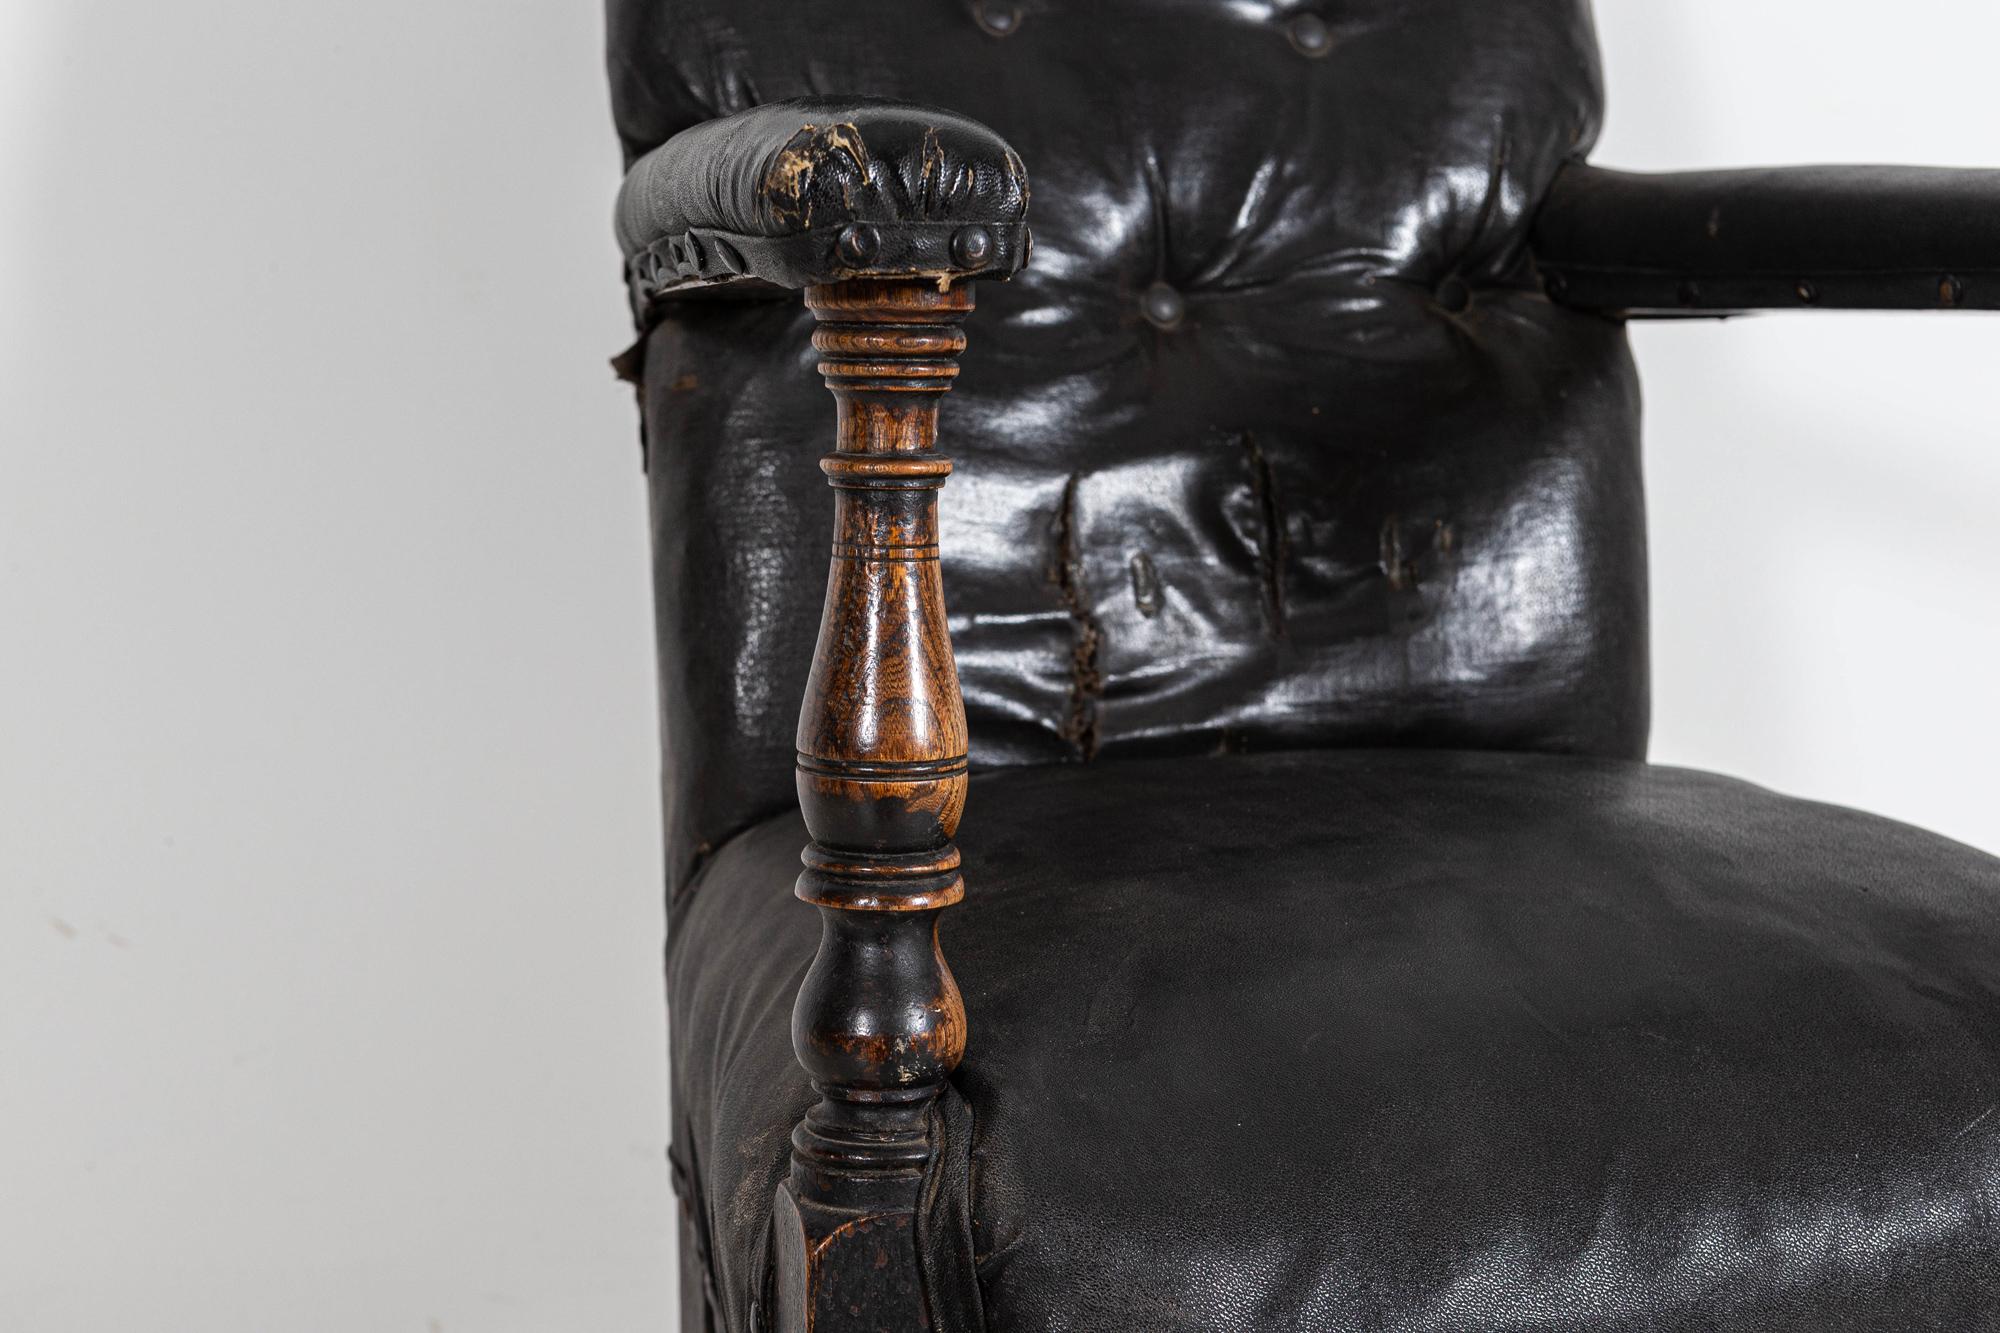 Circa 1830

Early 19thC Irish tall ebonised button back artist portrait sitters chair - rexine leather with past repairs

 

Measures: W55 x D41 x H129 cm.